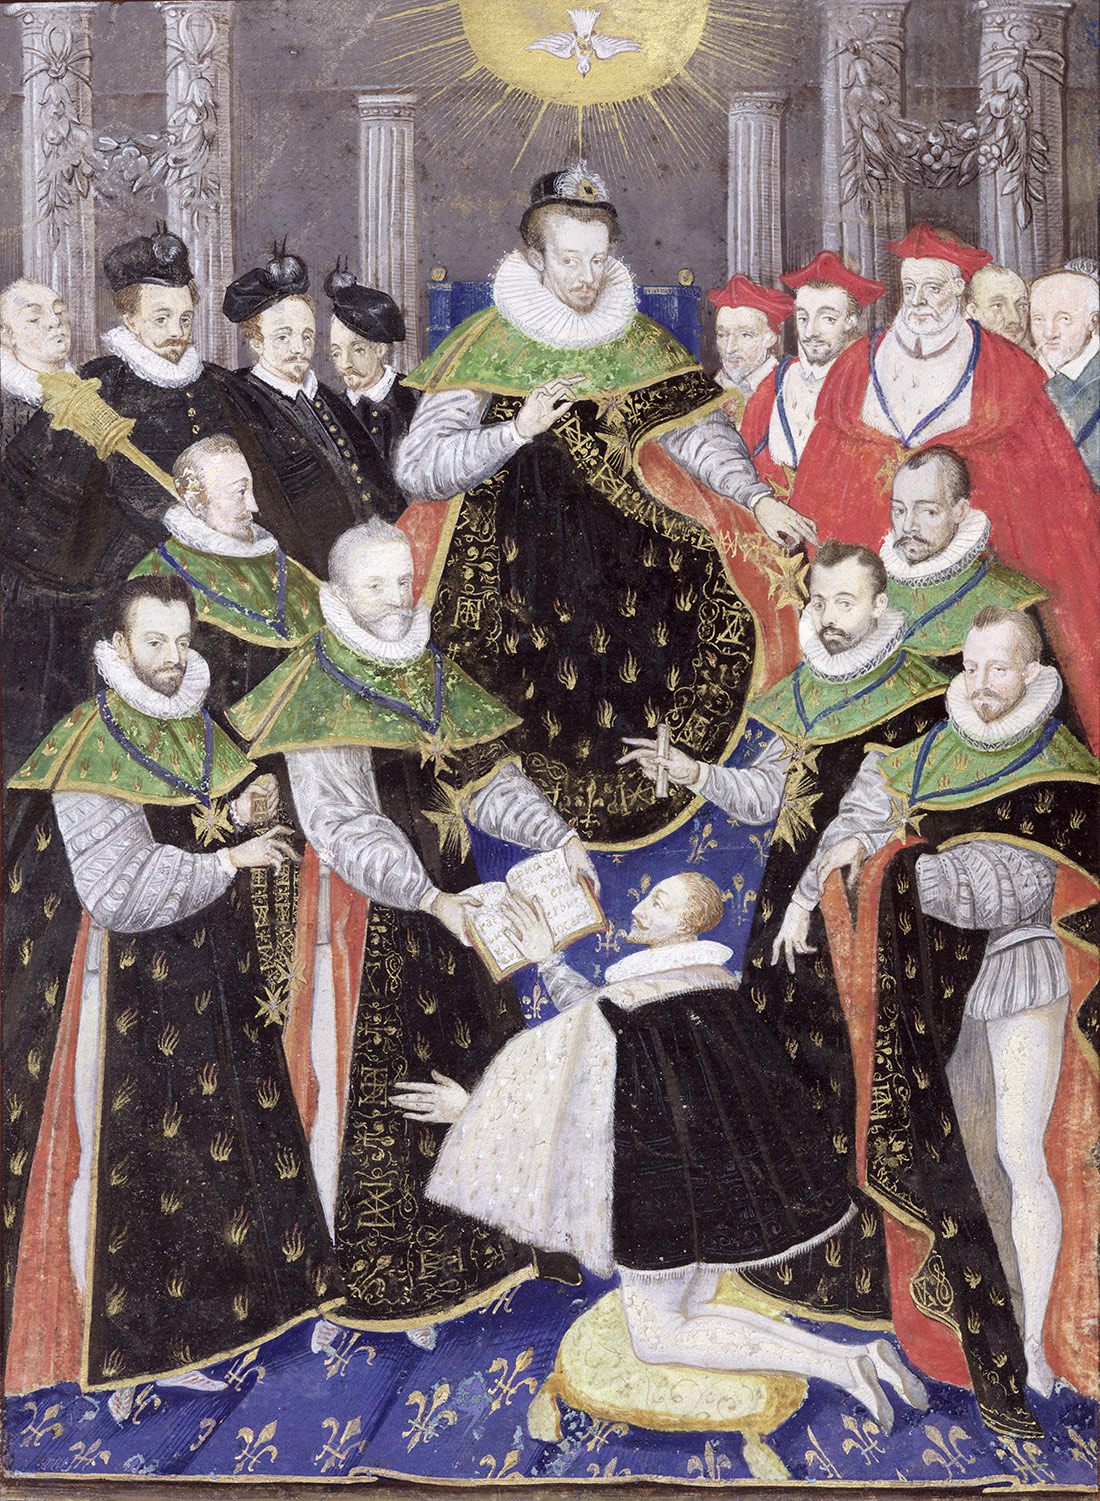 Henry III at court, from the First Chapter of the Holy Spirit, 16th-century manuscript.